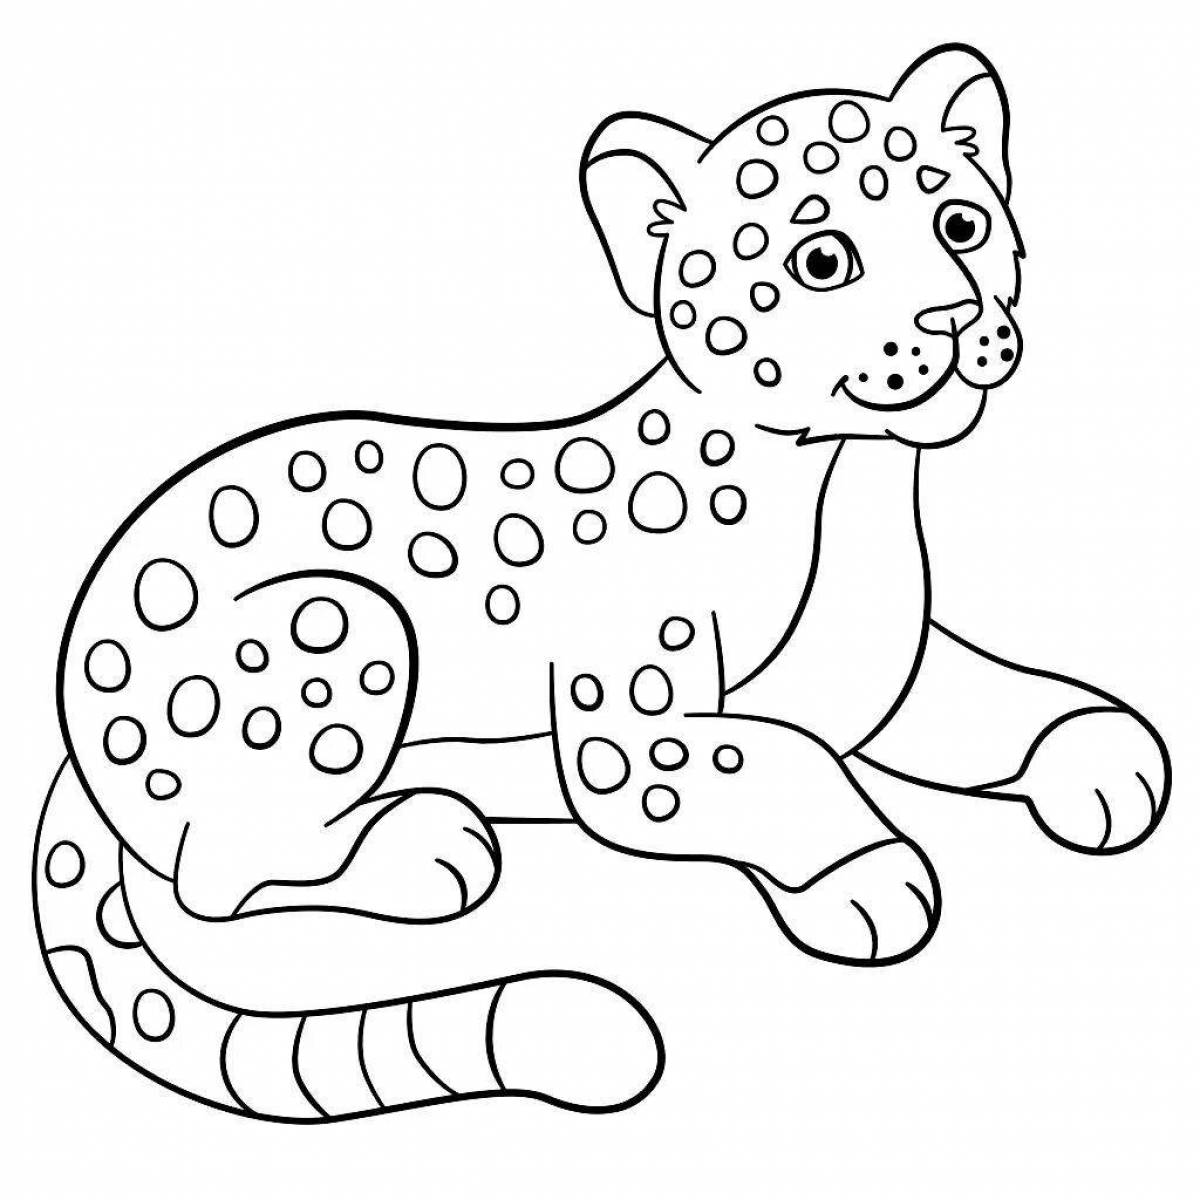 Attractive snow leopard coloring page